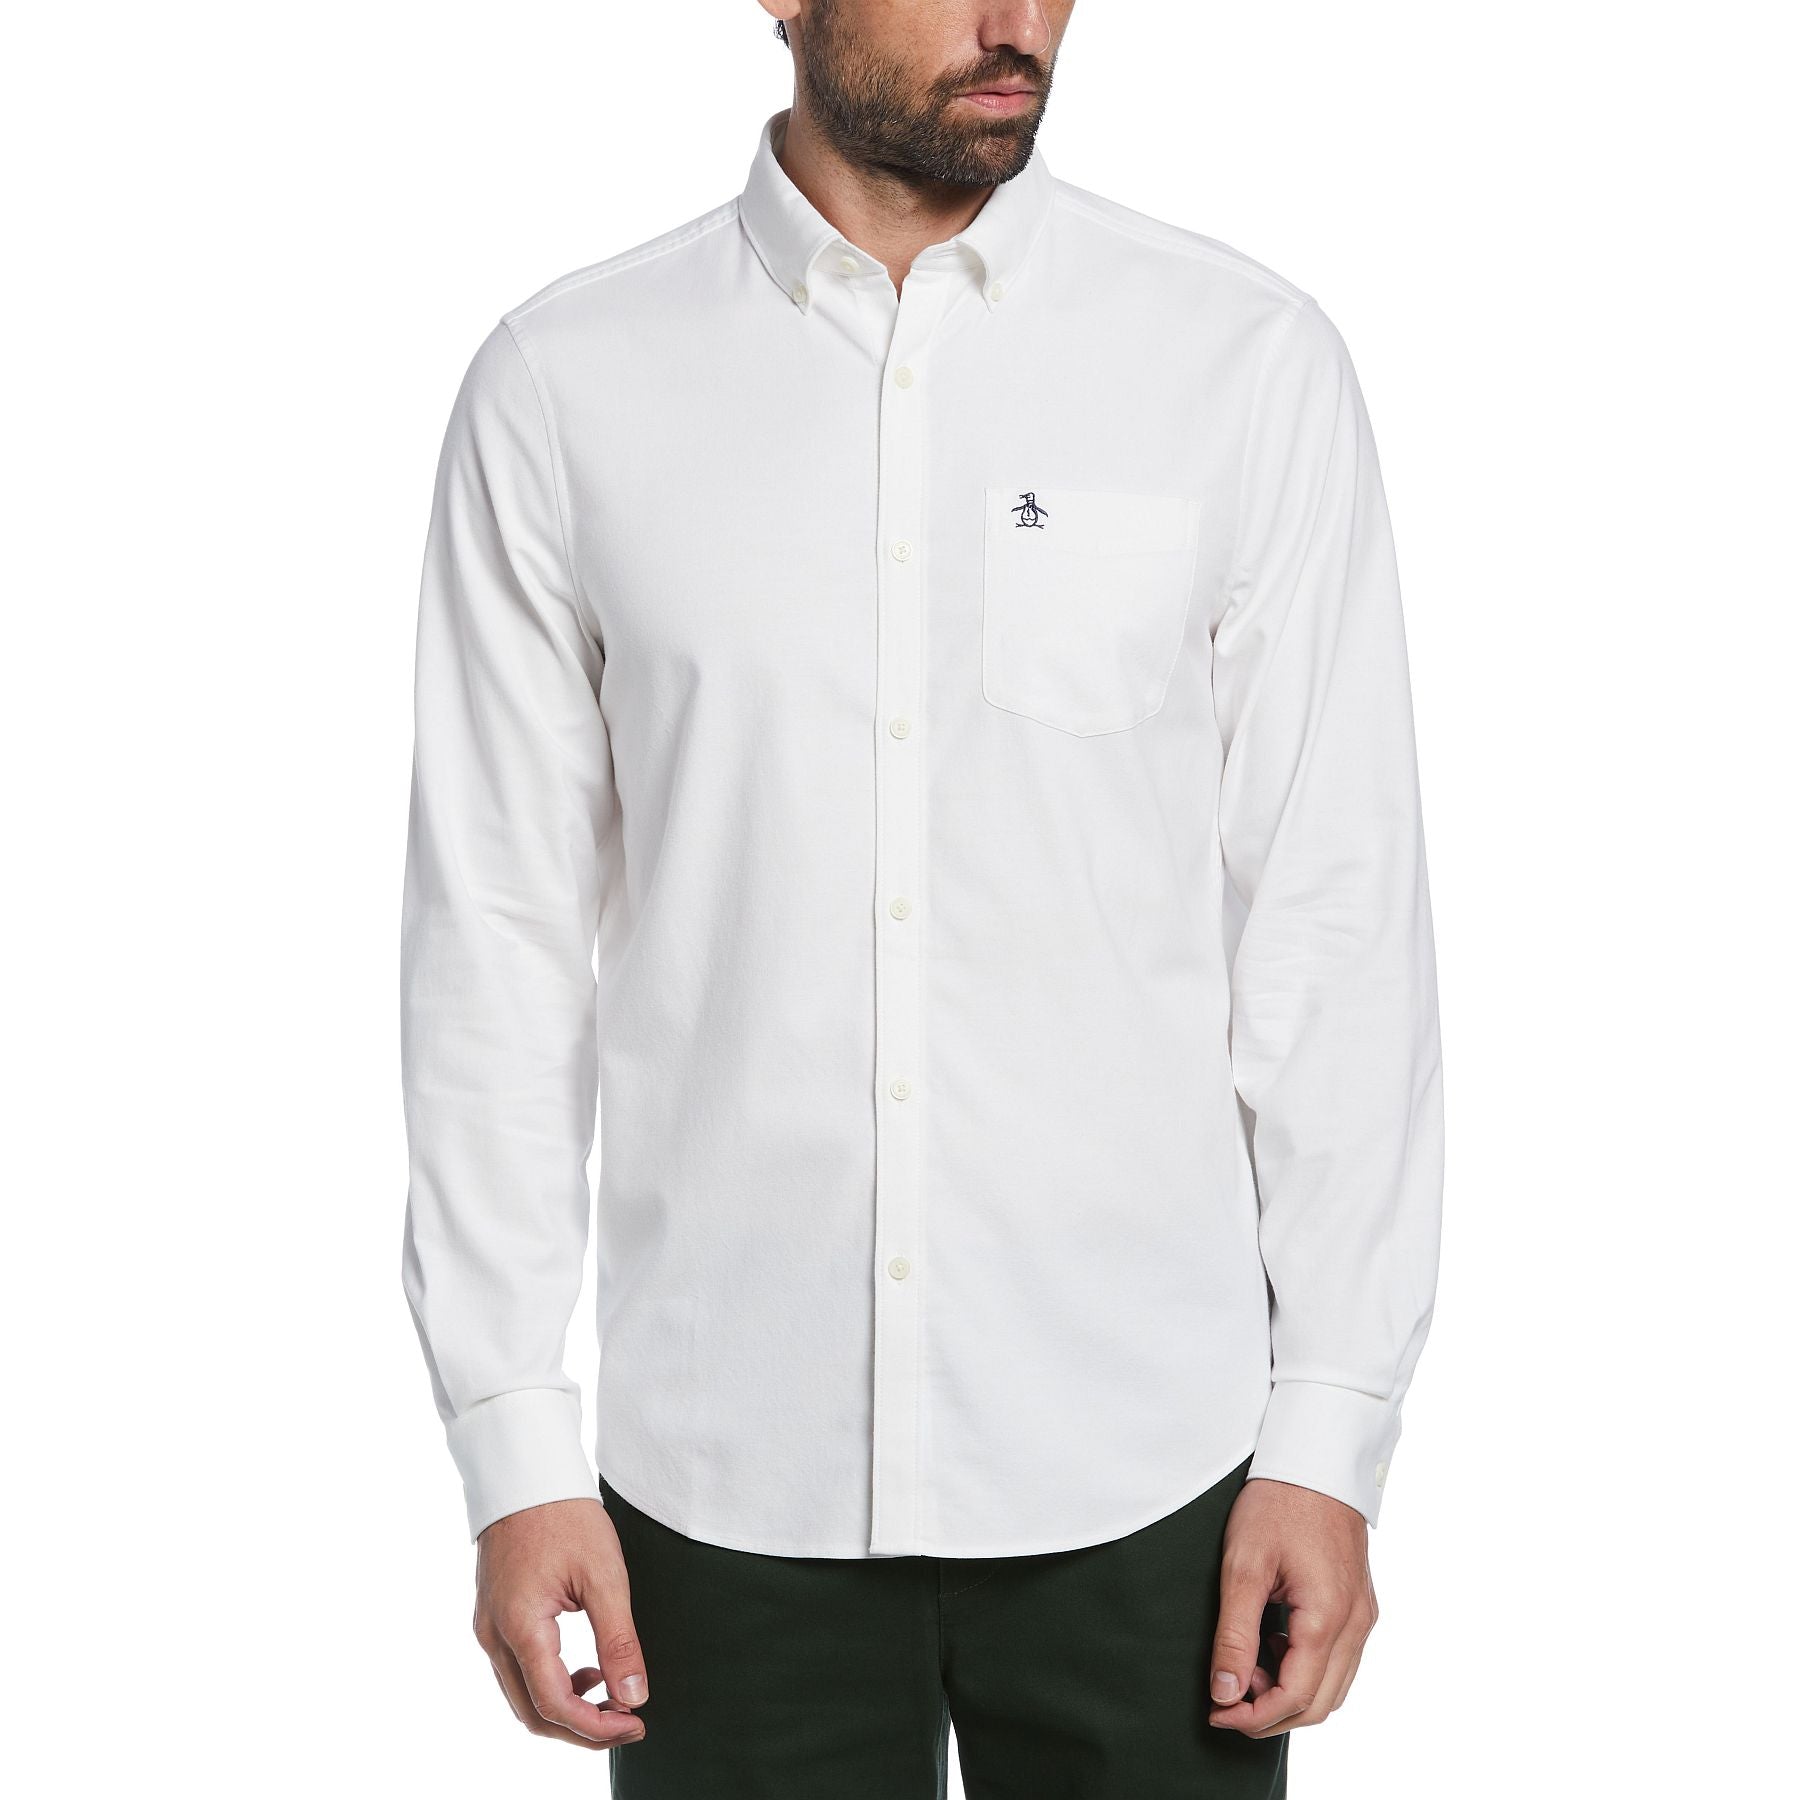 View Ecovero Oxford Stretch Shirt In Bright White information